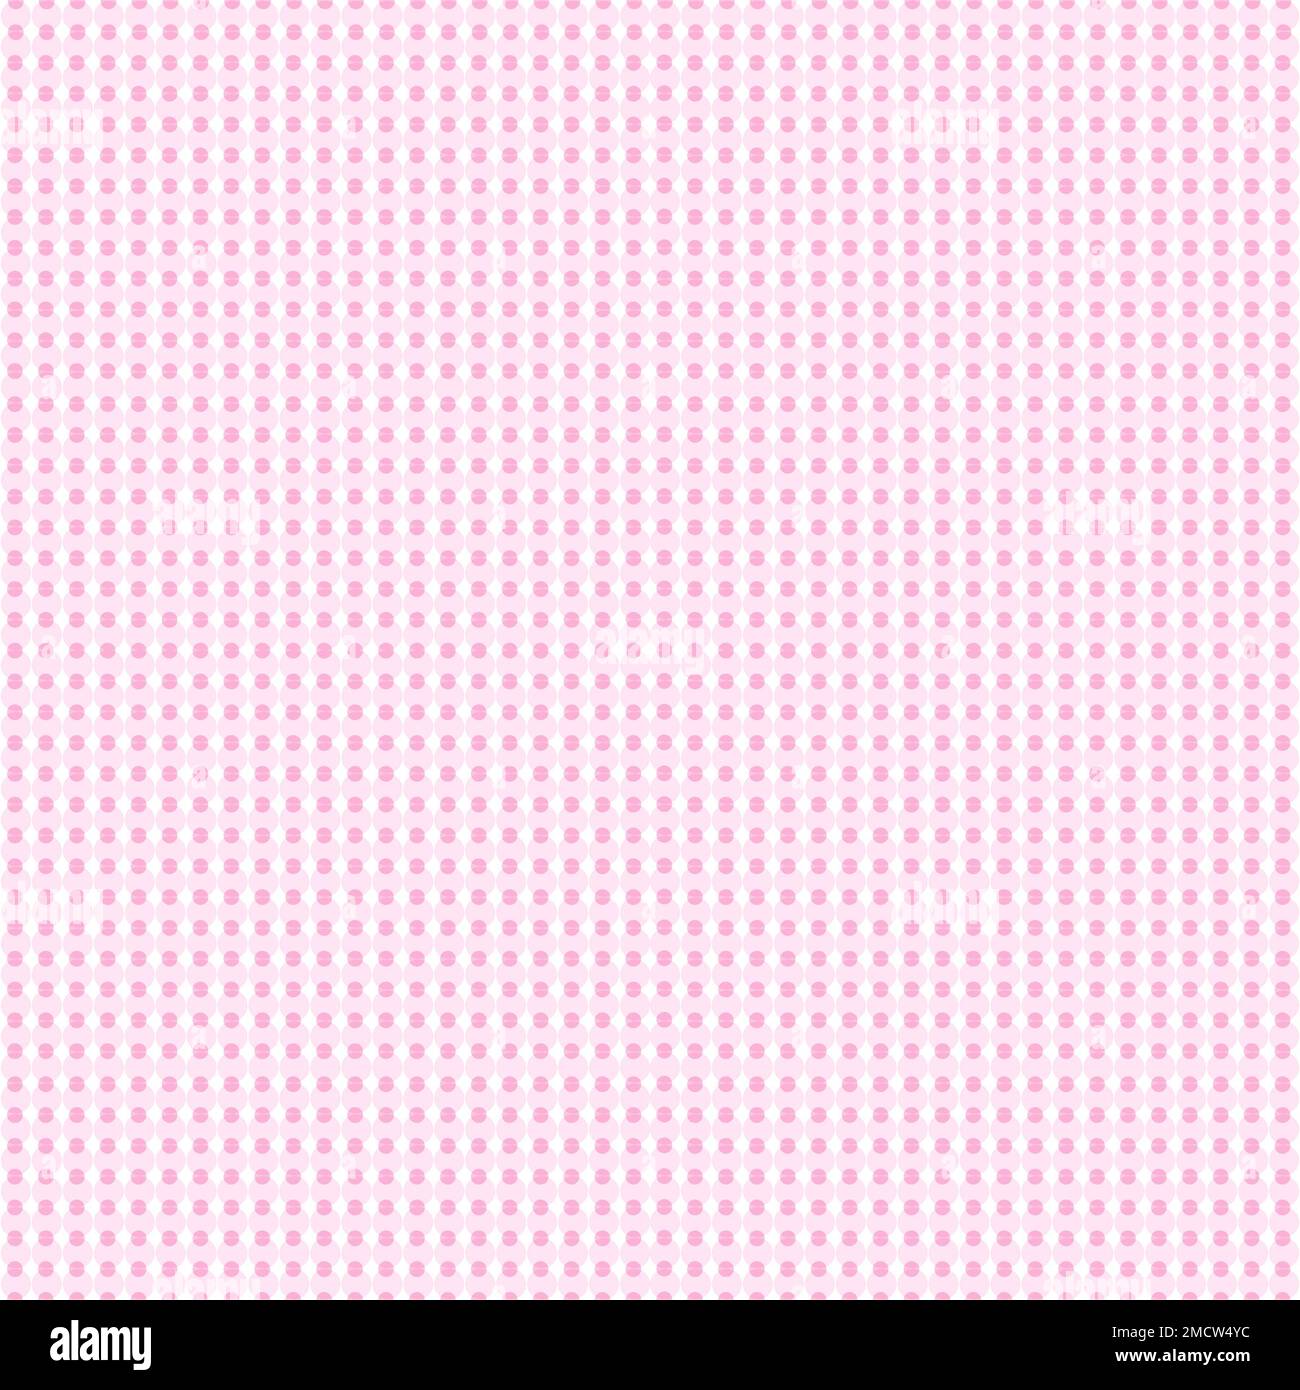 Dots seamless pattern, pink and white color, geometric background Stock Photo